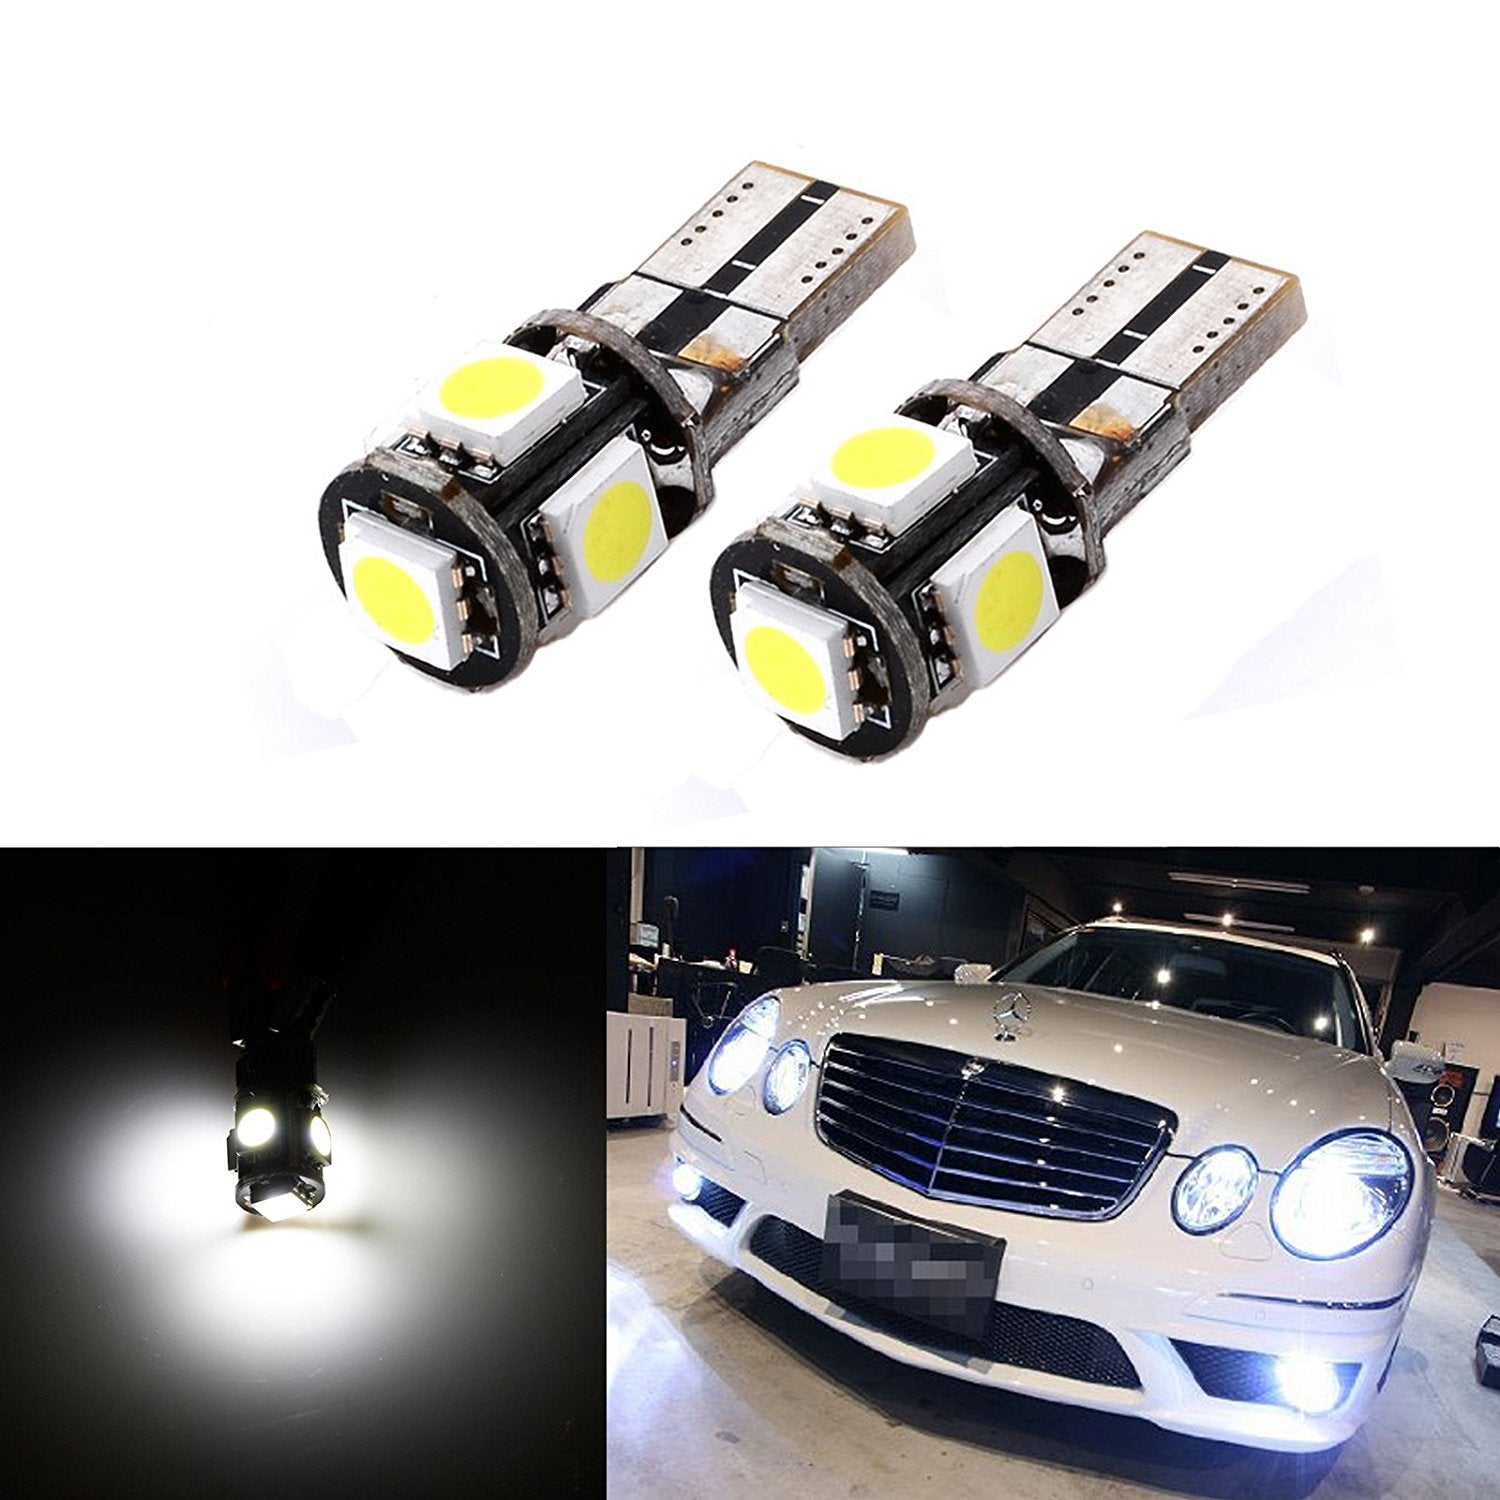 T10 W5w LED Bulb Canbus 168 194 Clearance Parking Lights for Benz